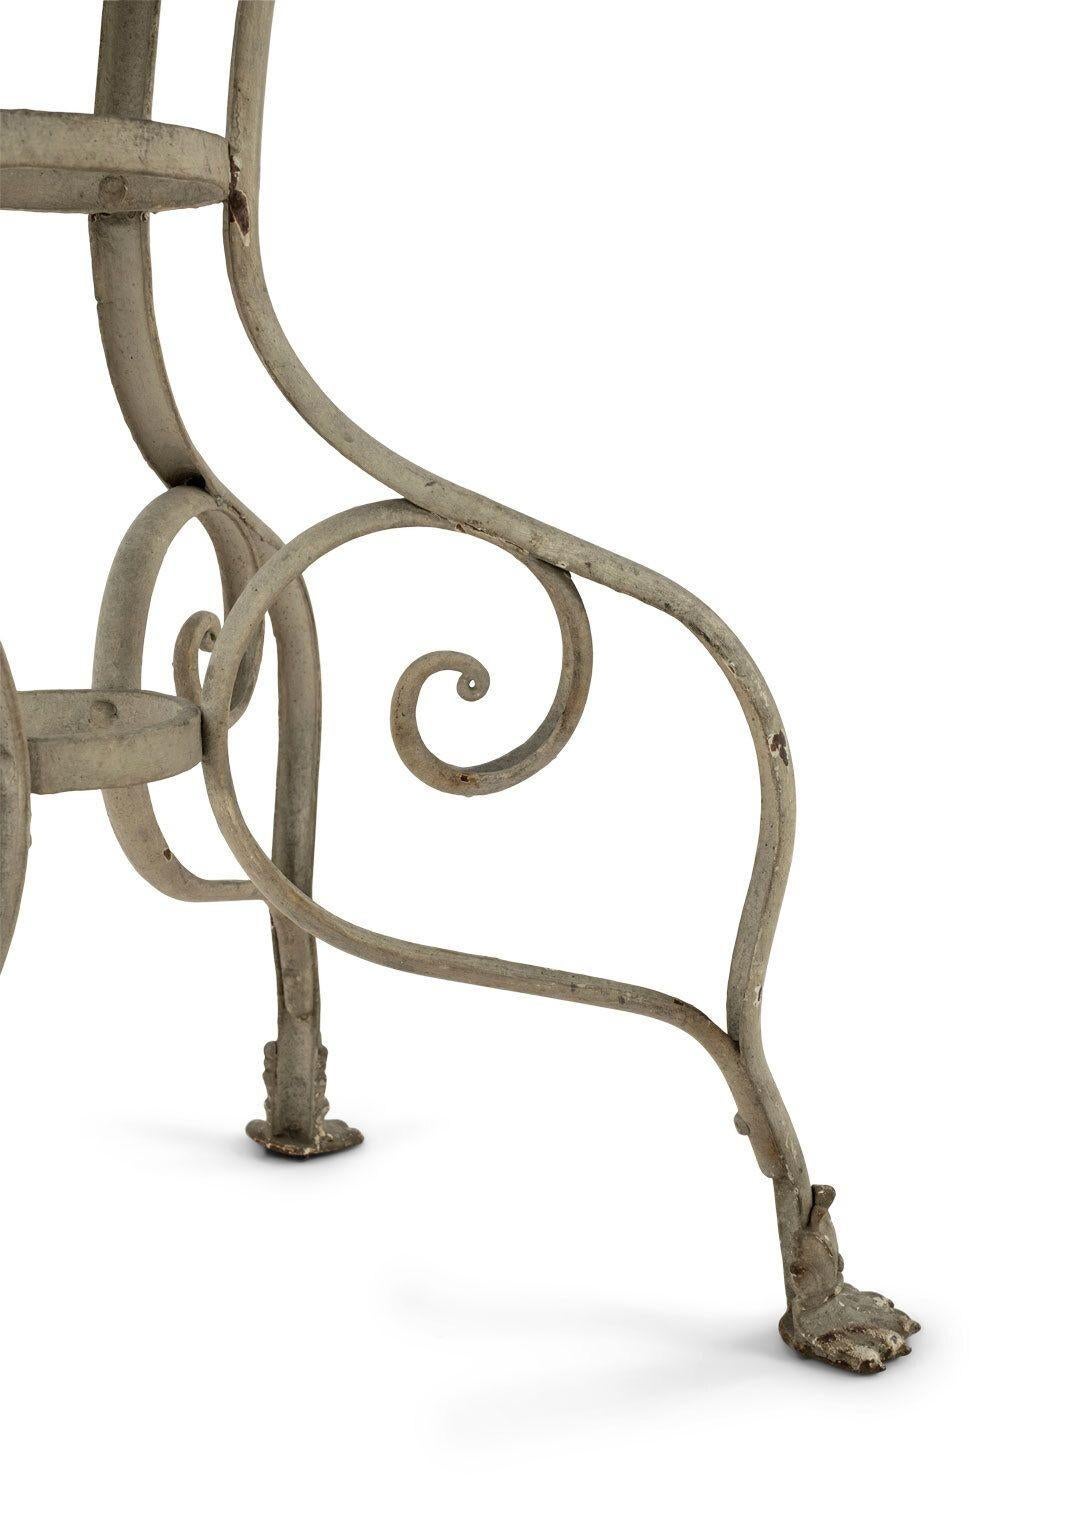 White-painted standing jardiniere in the style of Arras: painted wrought iron plant stand dating to late 19th century, France. Wire-work lattice jardiniere raised upon scrolled wrought iron base and cast lion's paw shaped feet. Currently contains